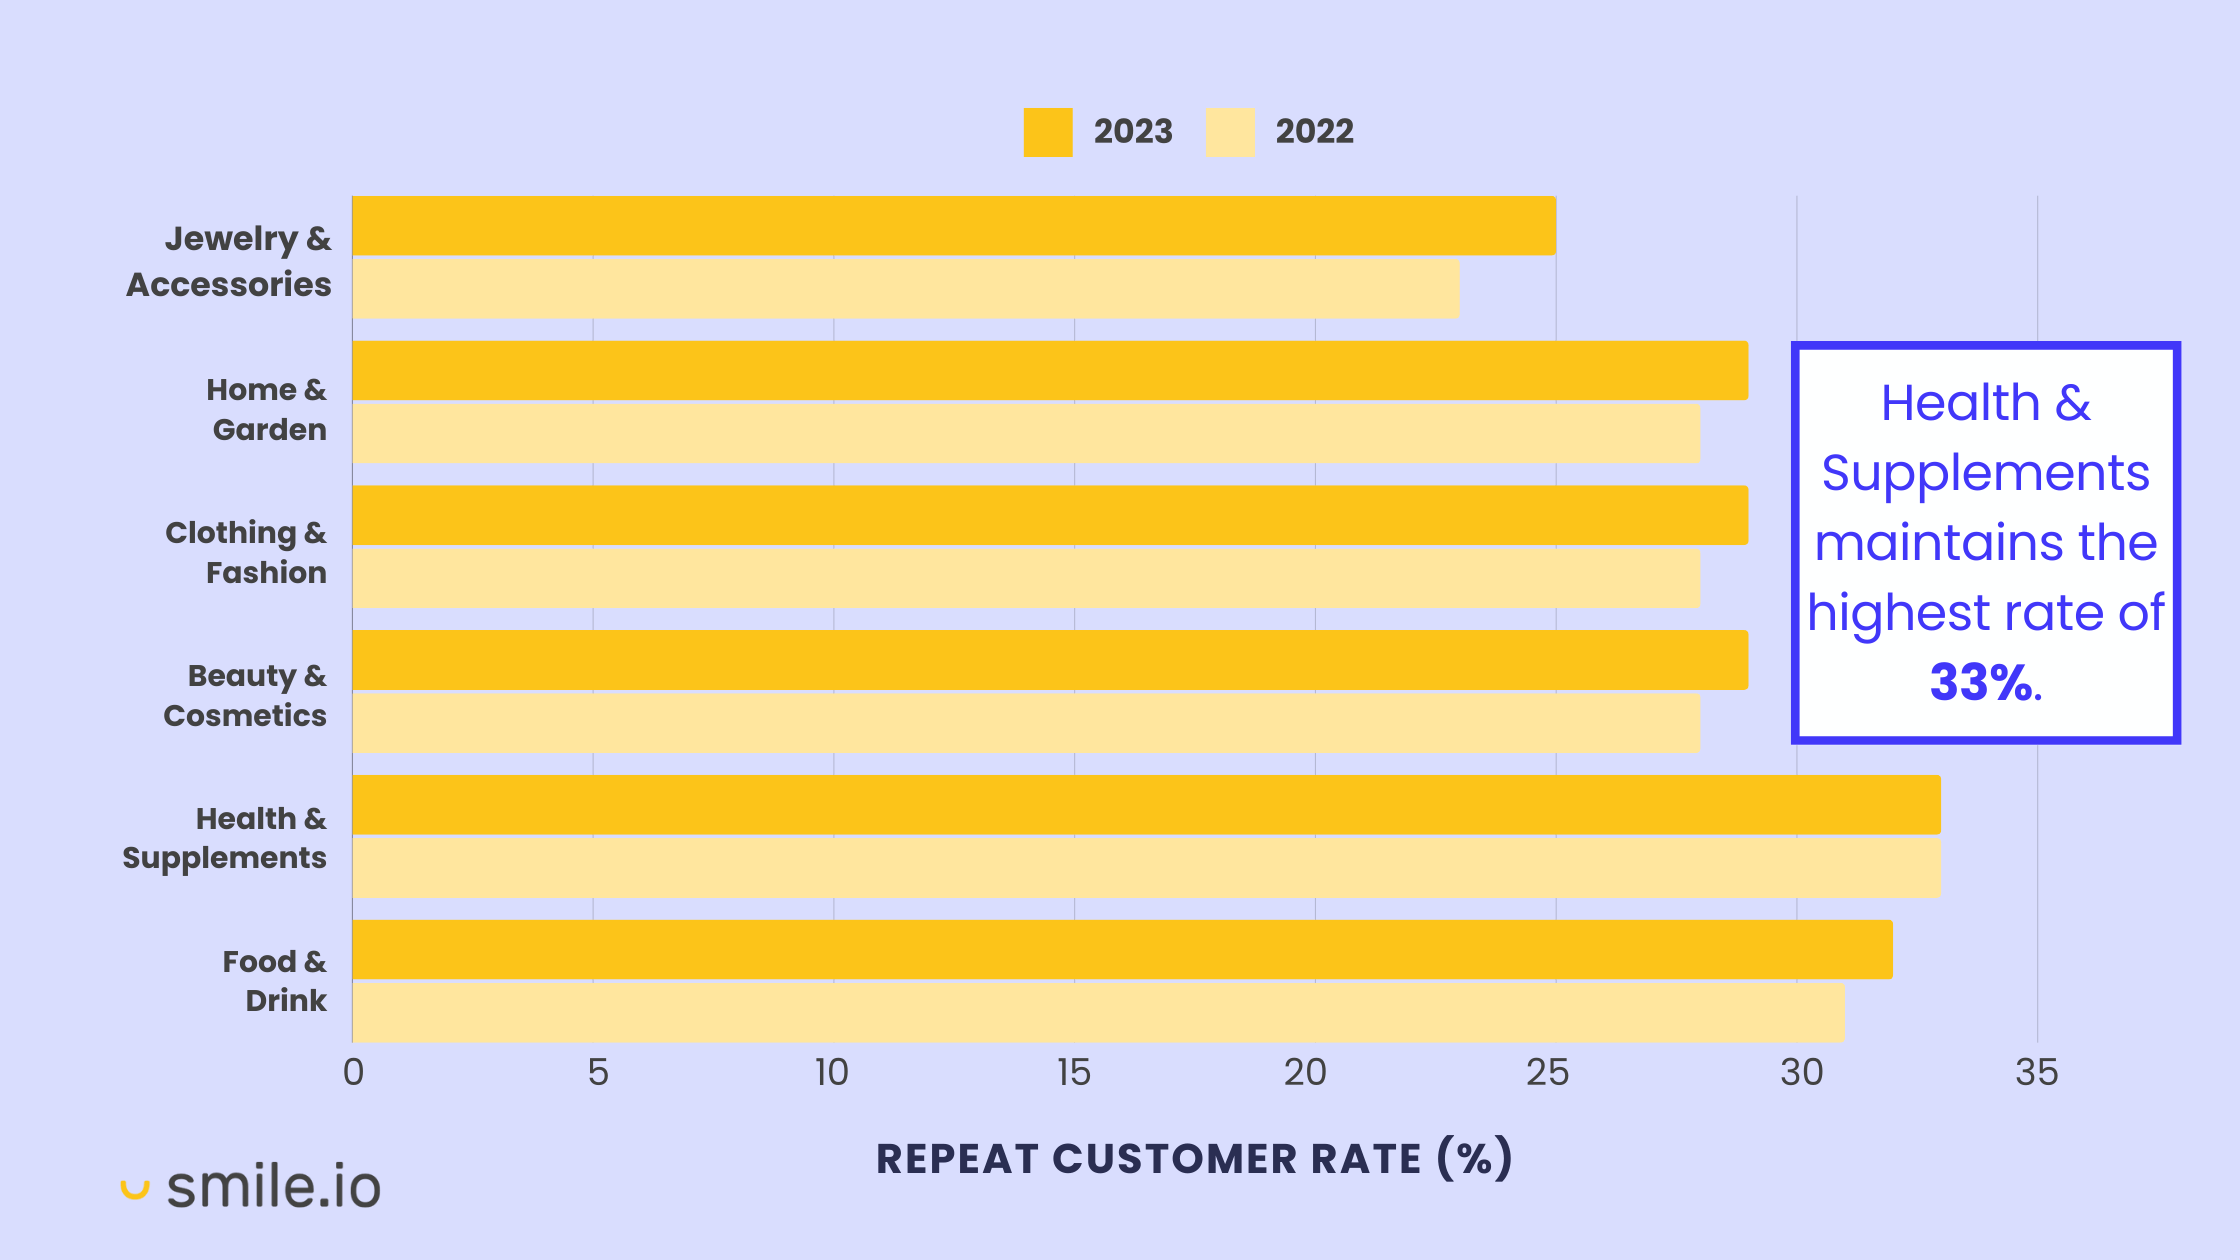 A bar graph showing the year-over-year changes in Repeat Customer Rates for 6 main industries (Jewelry & Accessories, Home & Garden, Clothing & Fashion, Beauty & Cosmetics, Health & Supplements, and Food & Drink). There is a call-out that says Health and Supplements maintains the highest rate of 33%. 